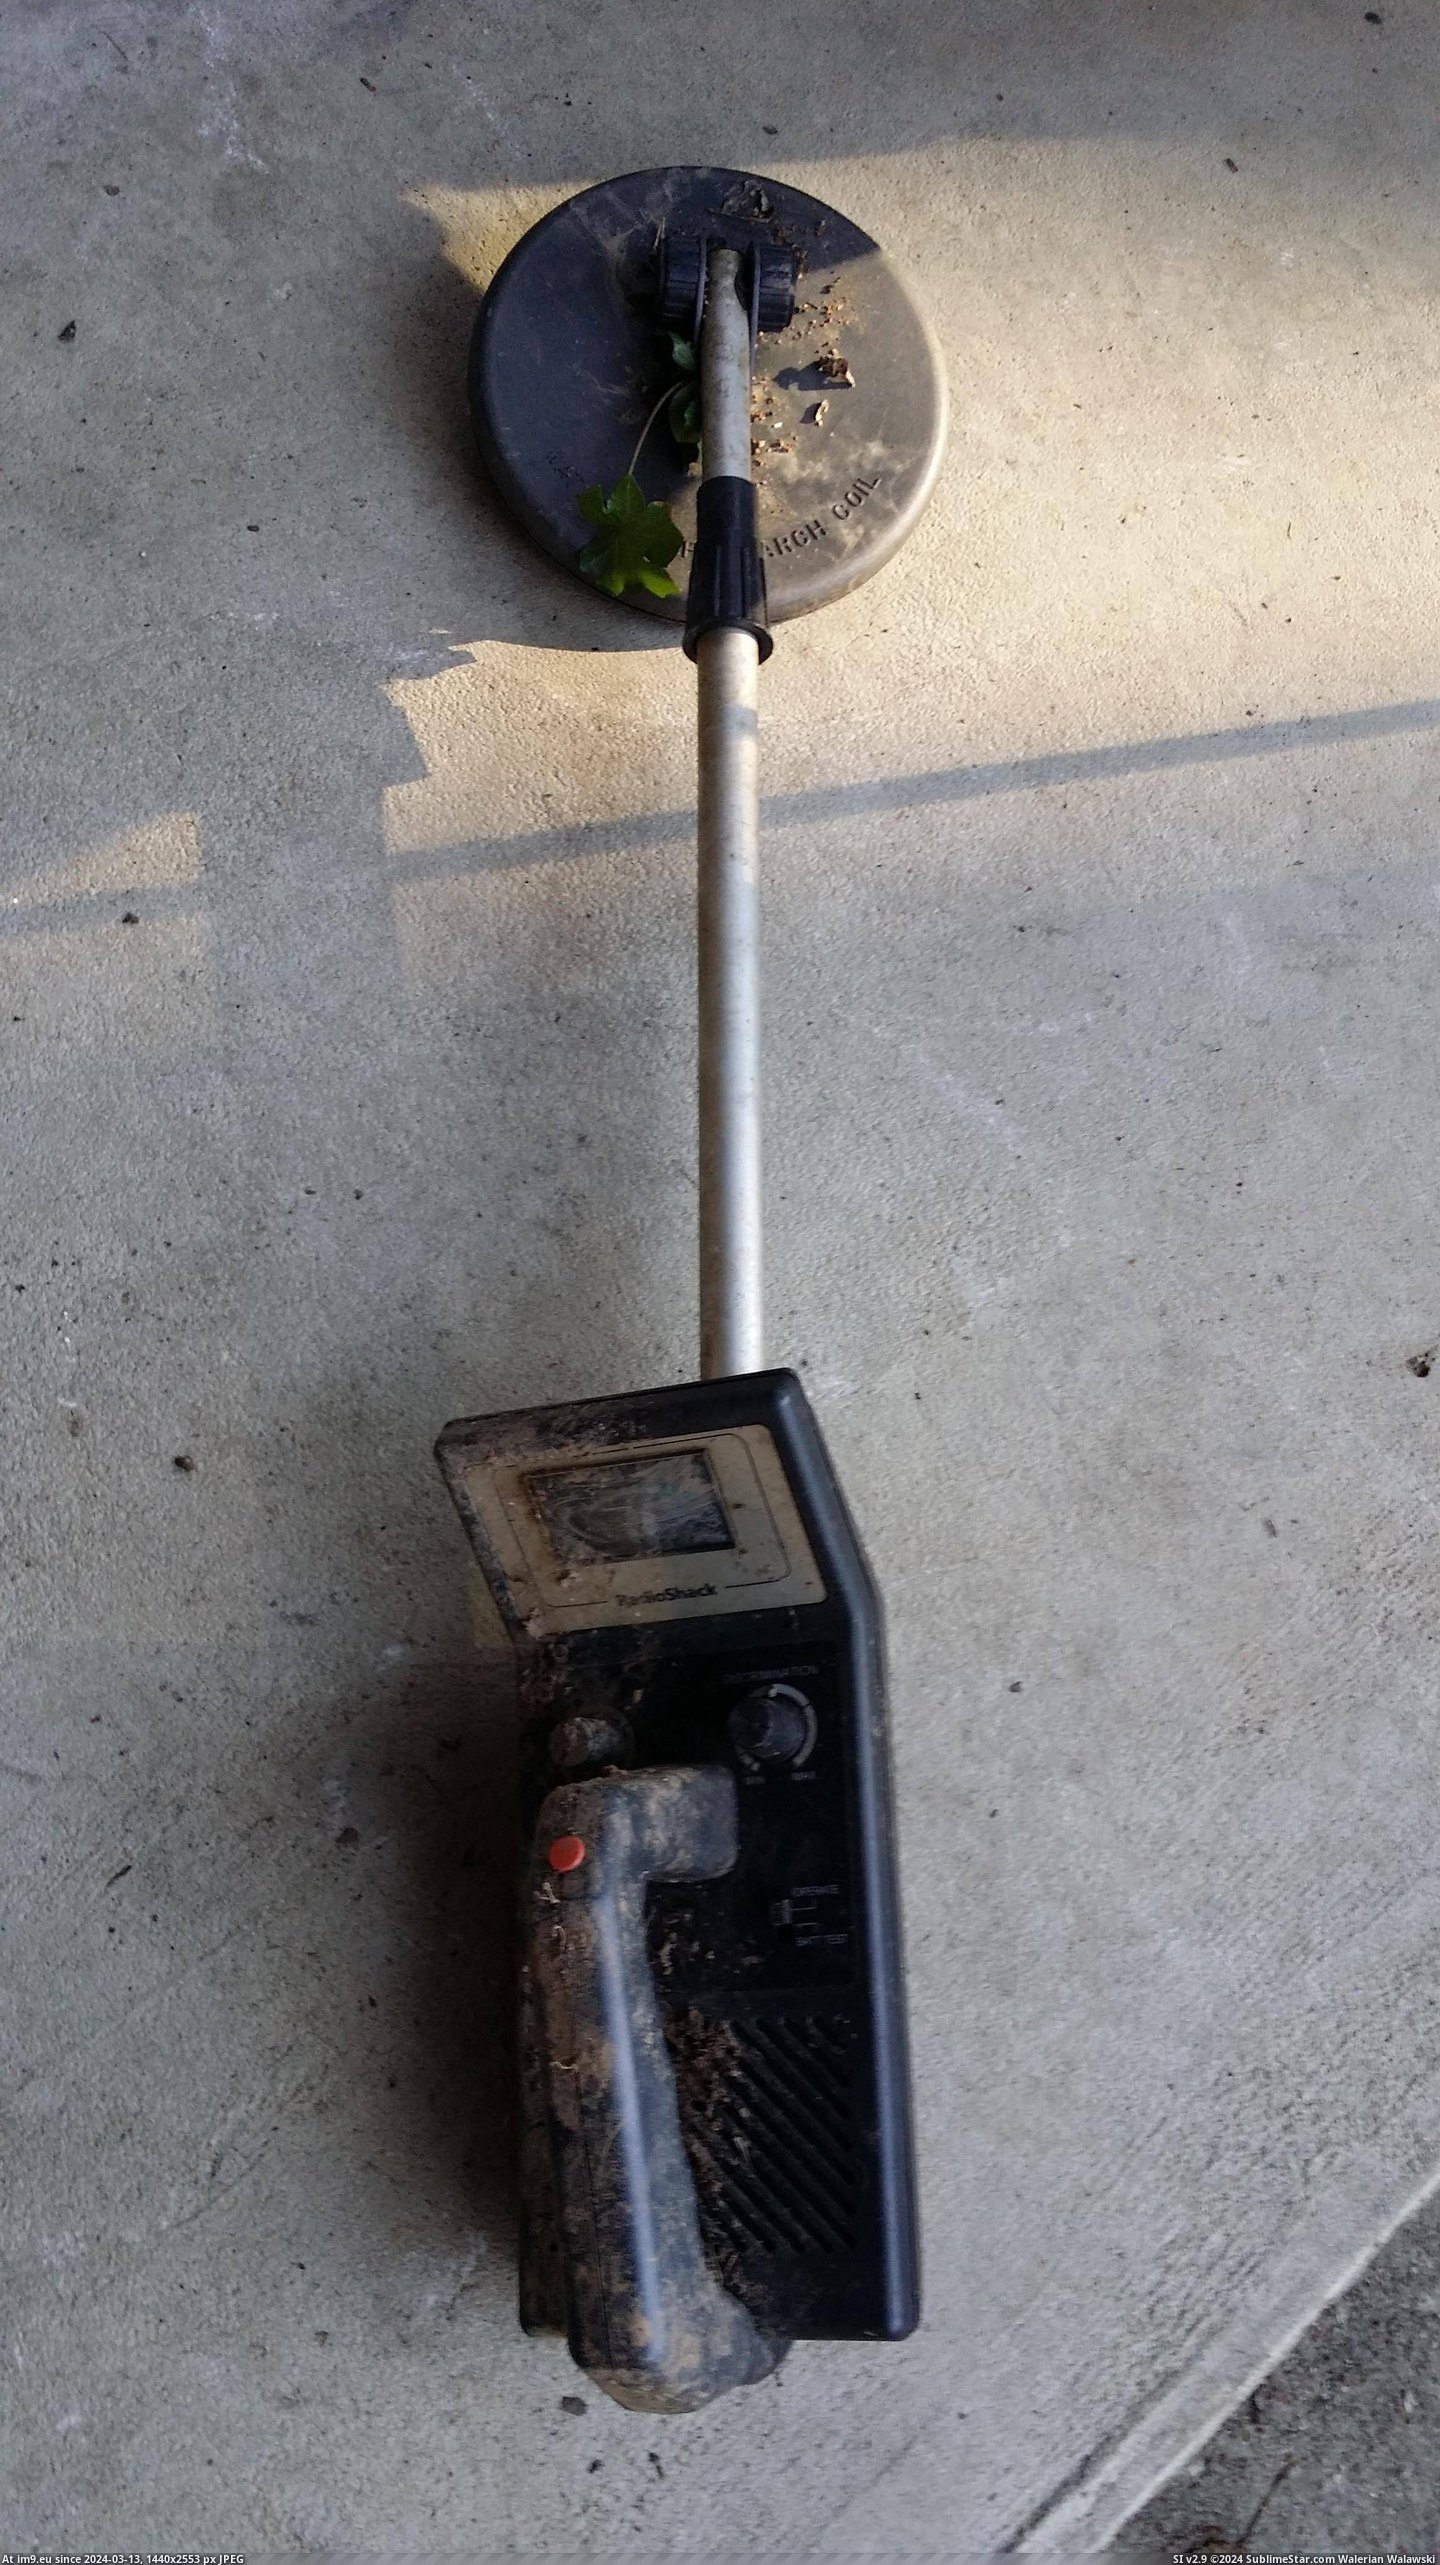 #Year #Old #Christmas #Received #Parent #Property #Son #Asked #Metal [Pics] My 11-year old son asked for & received a metal detector for Christmas. He took it out on my parent's property, and t Pic. (Изображение из альбом My r/PICS favs))